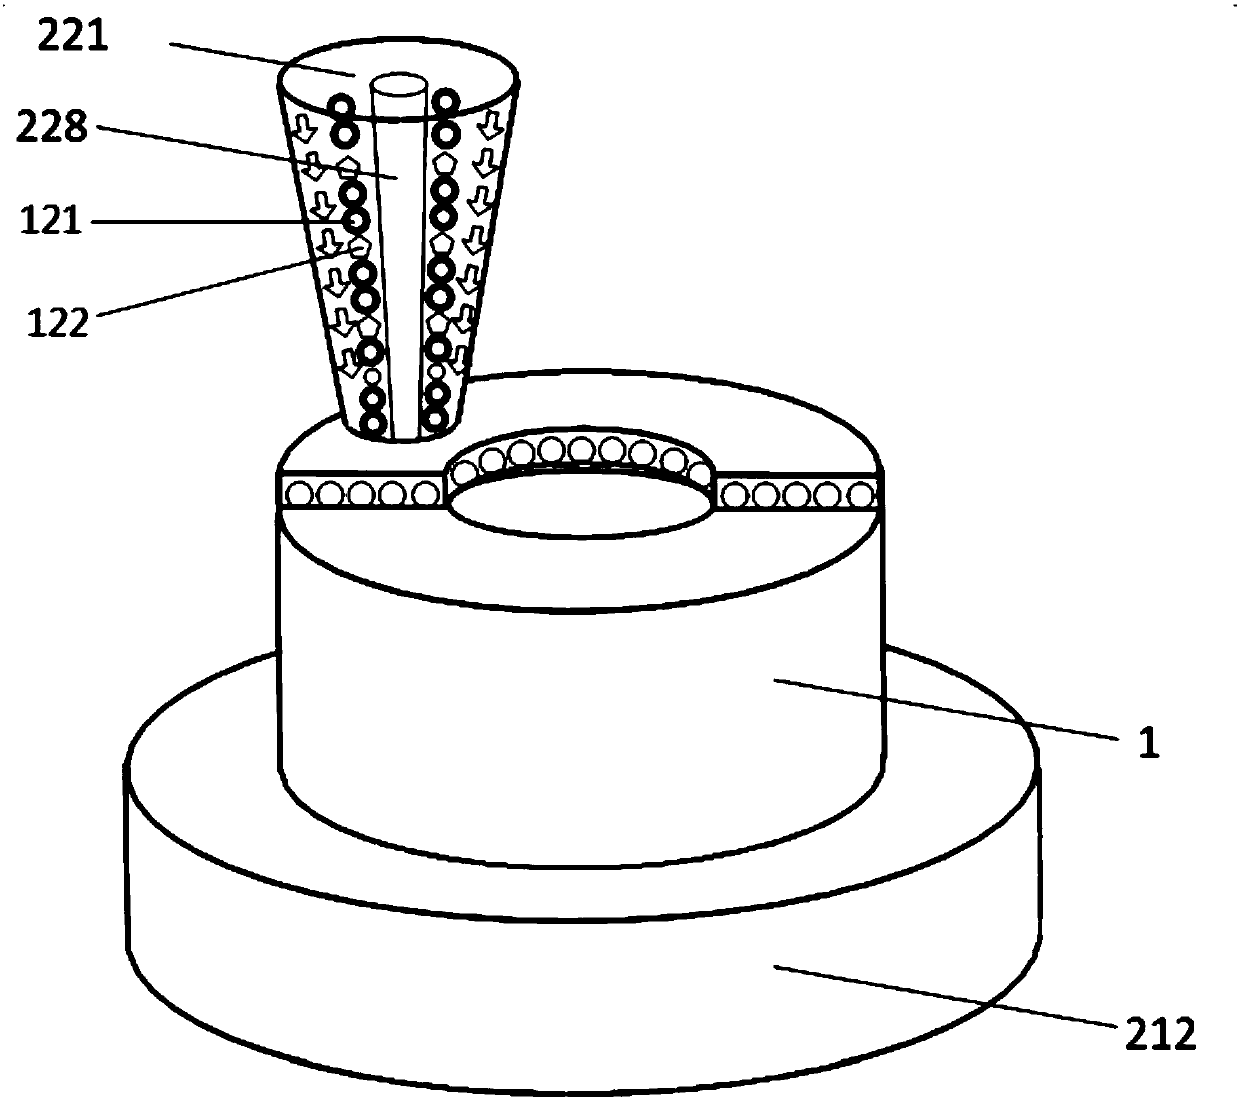 Metal bonding agent 3D printing grinding wheel with random porous structure and device and method